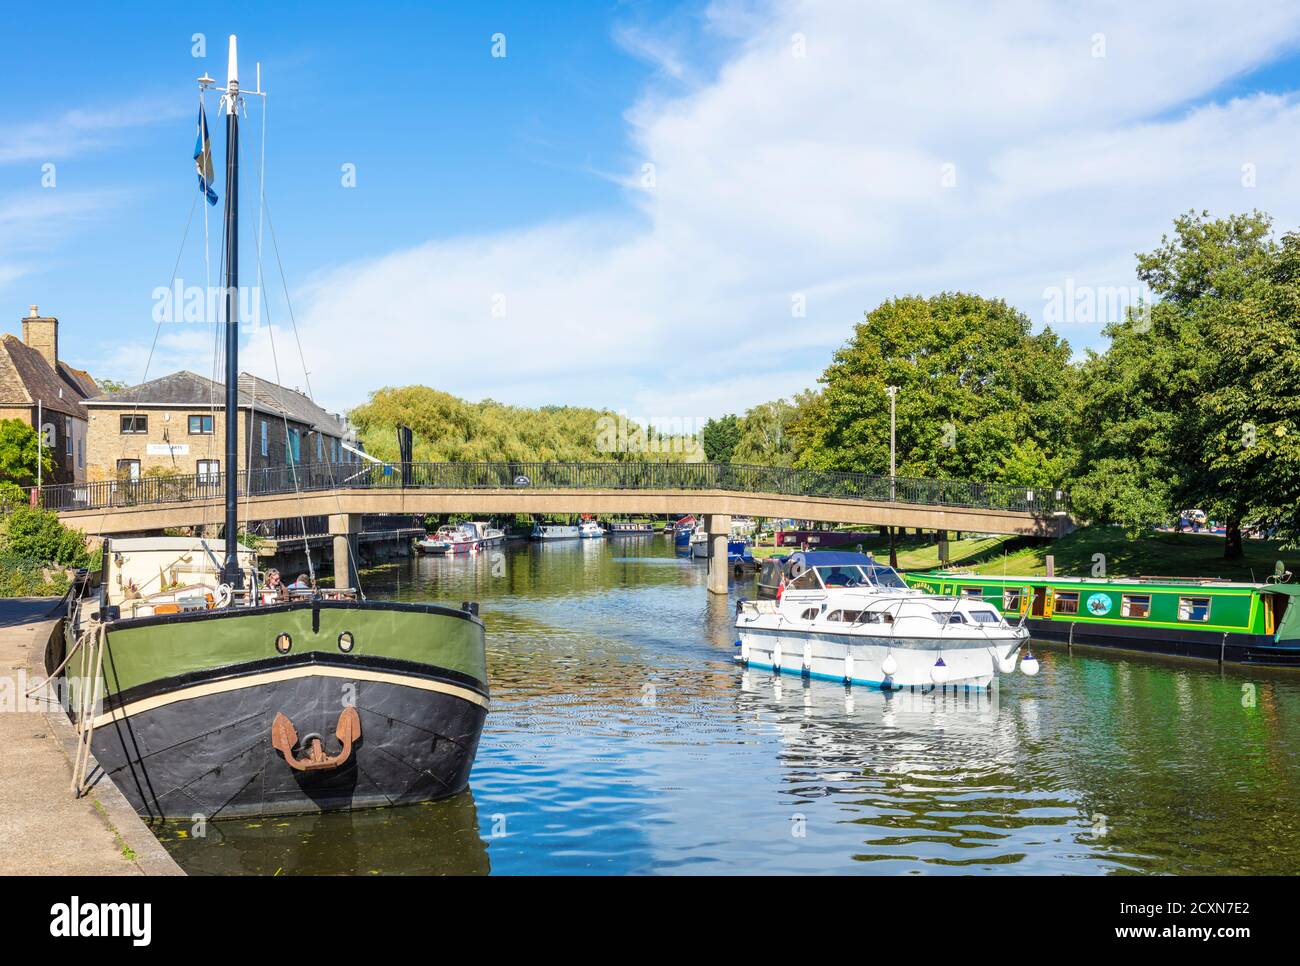 Boats on the River great Ouse and the Babylon bridge over the river Great Ouse Ely Cambridgeshire England UK GB Europe Stock Photo